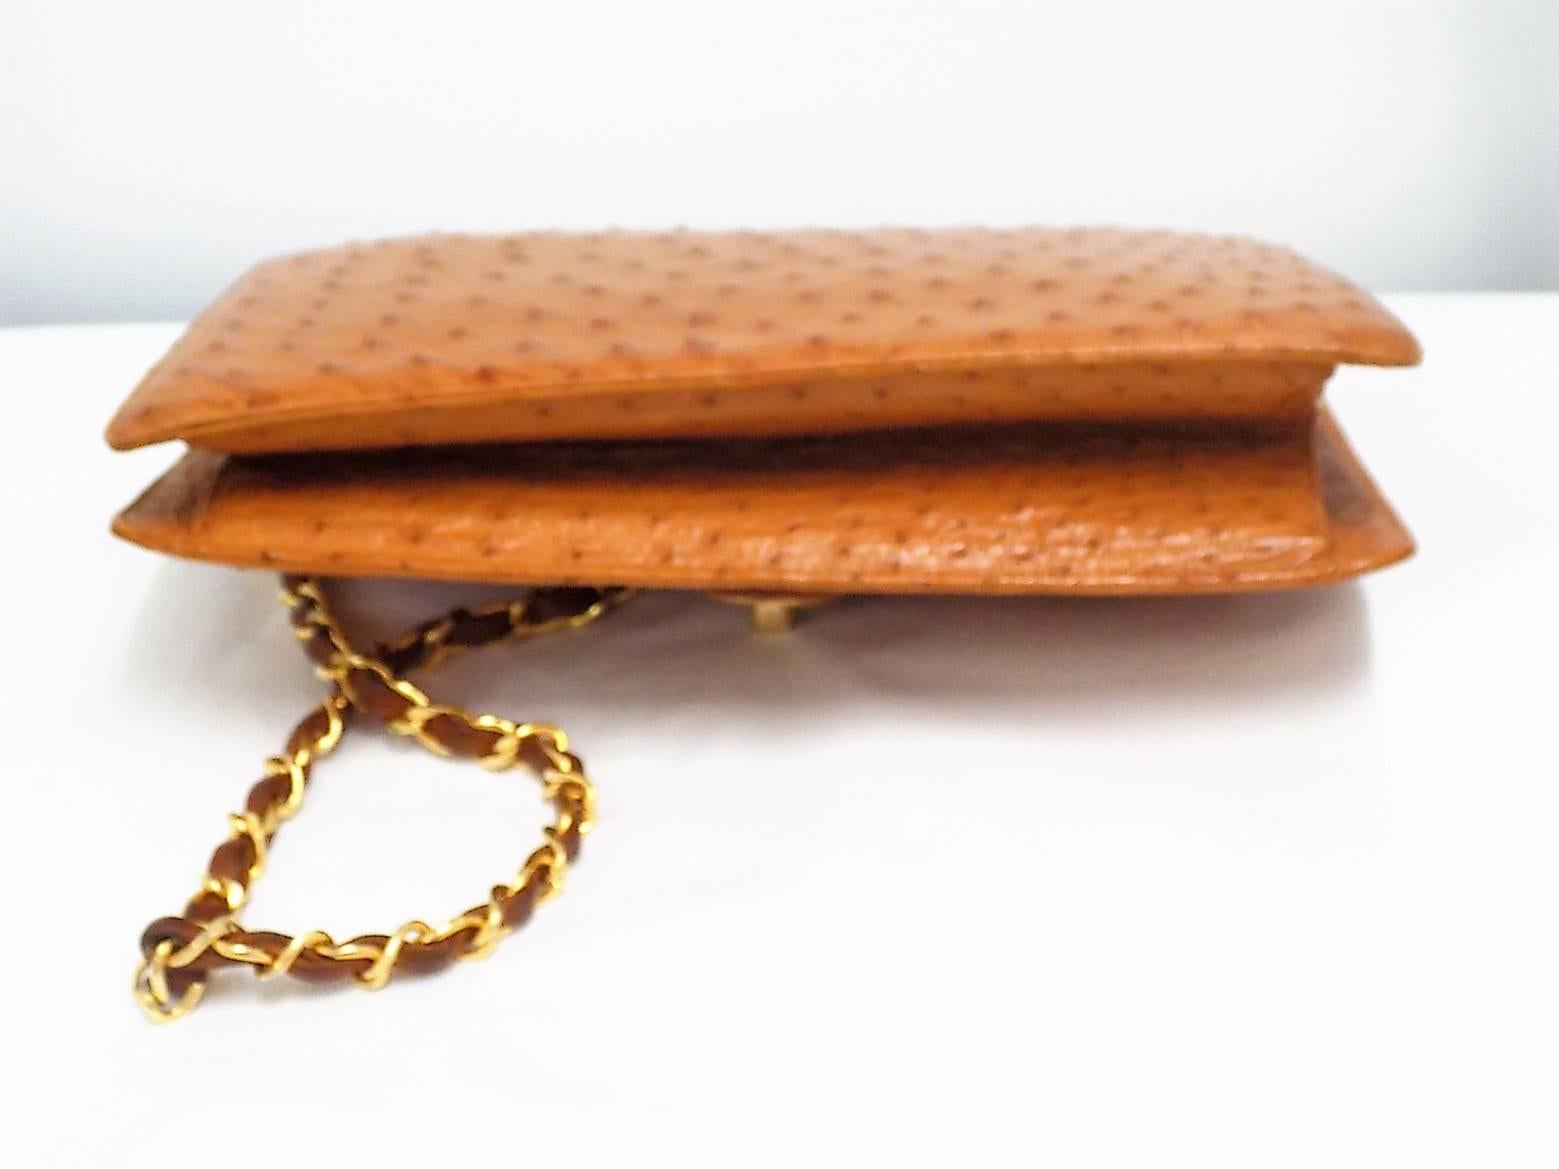 Chanel Rare Vintage  Ostrich  Flap  Bag / Clutch with chain strap 1